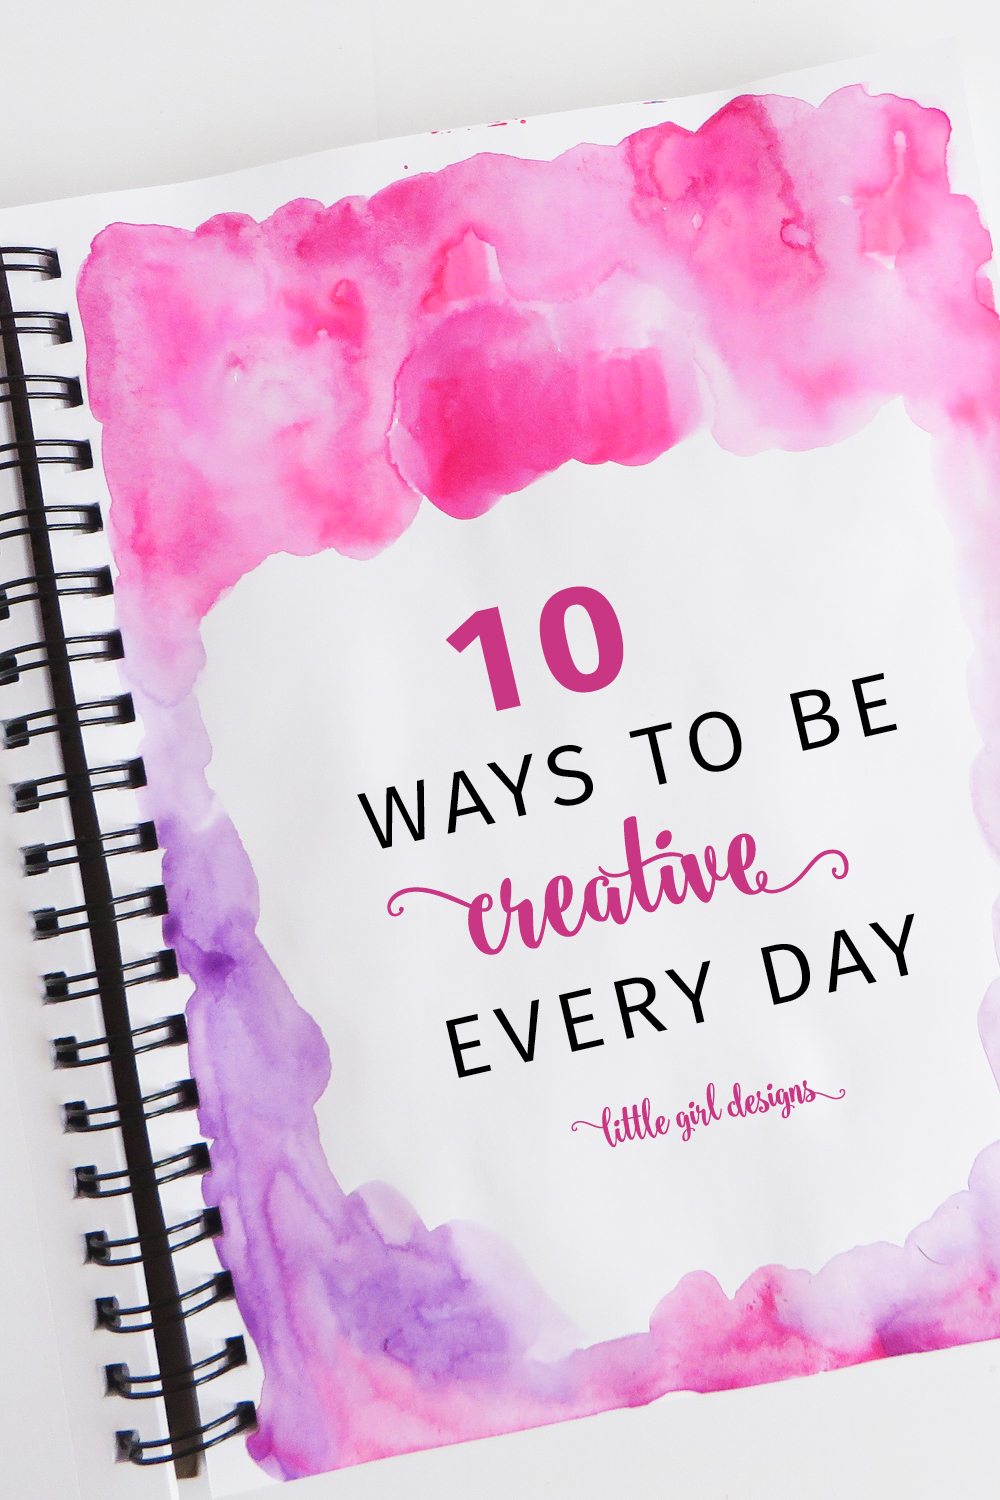 I want to be more creative this year, and am bookmarking this post because I need to hear it daily! I'm taking baby steps to being more creative every day and my family wants to thank you. I do too!